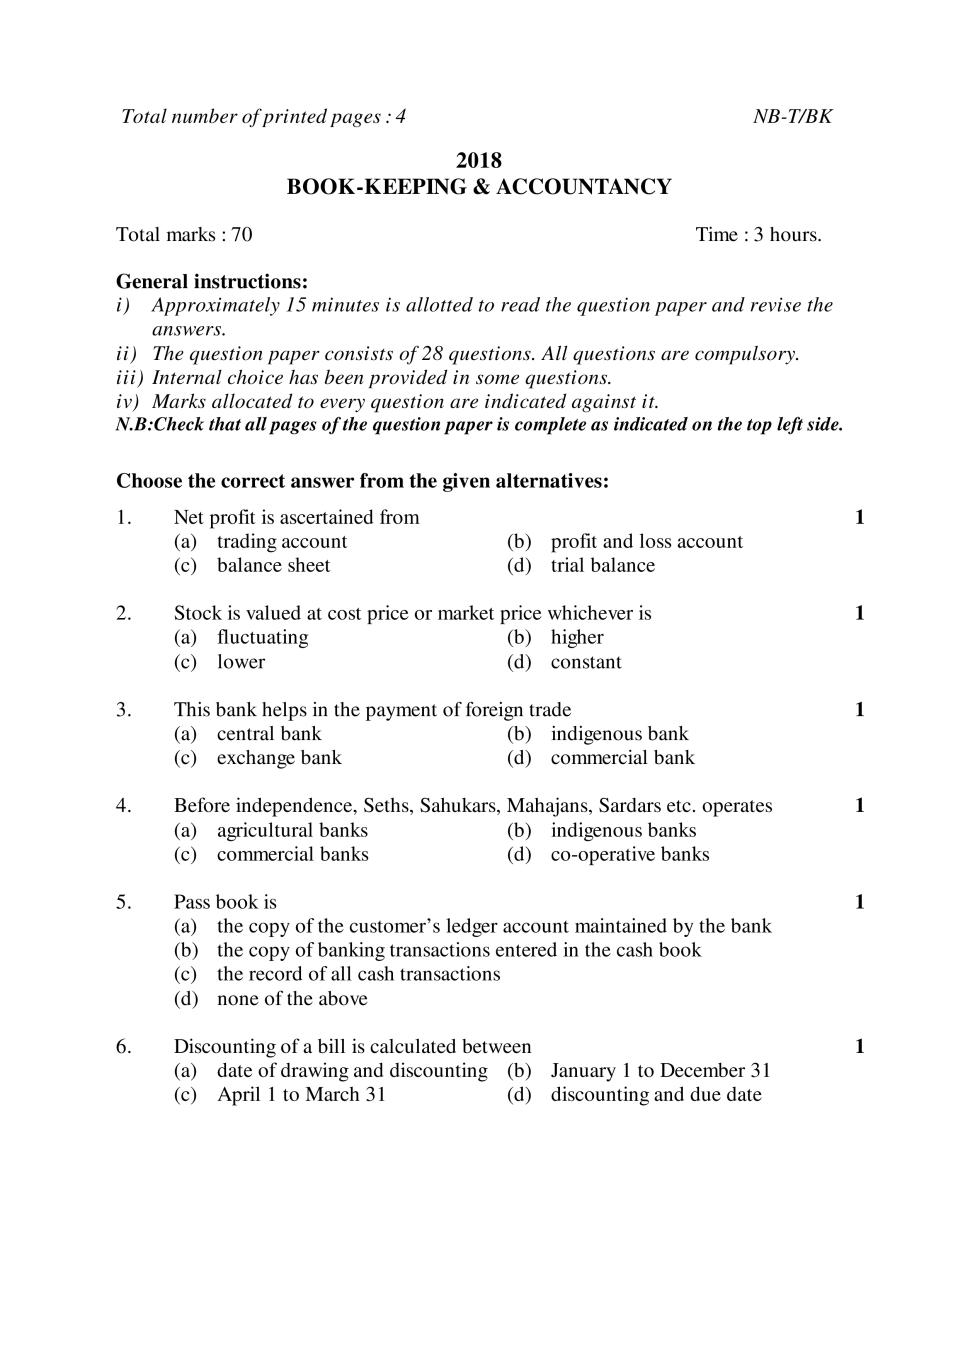 NBSE Class 10 Question Paper 2018 for Book Keeping Accountancy - Page 1